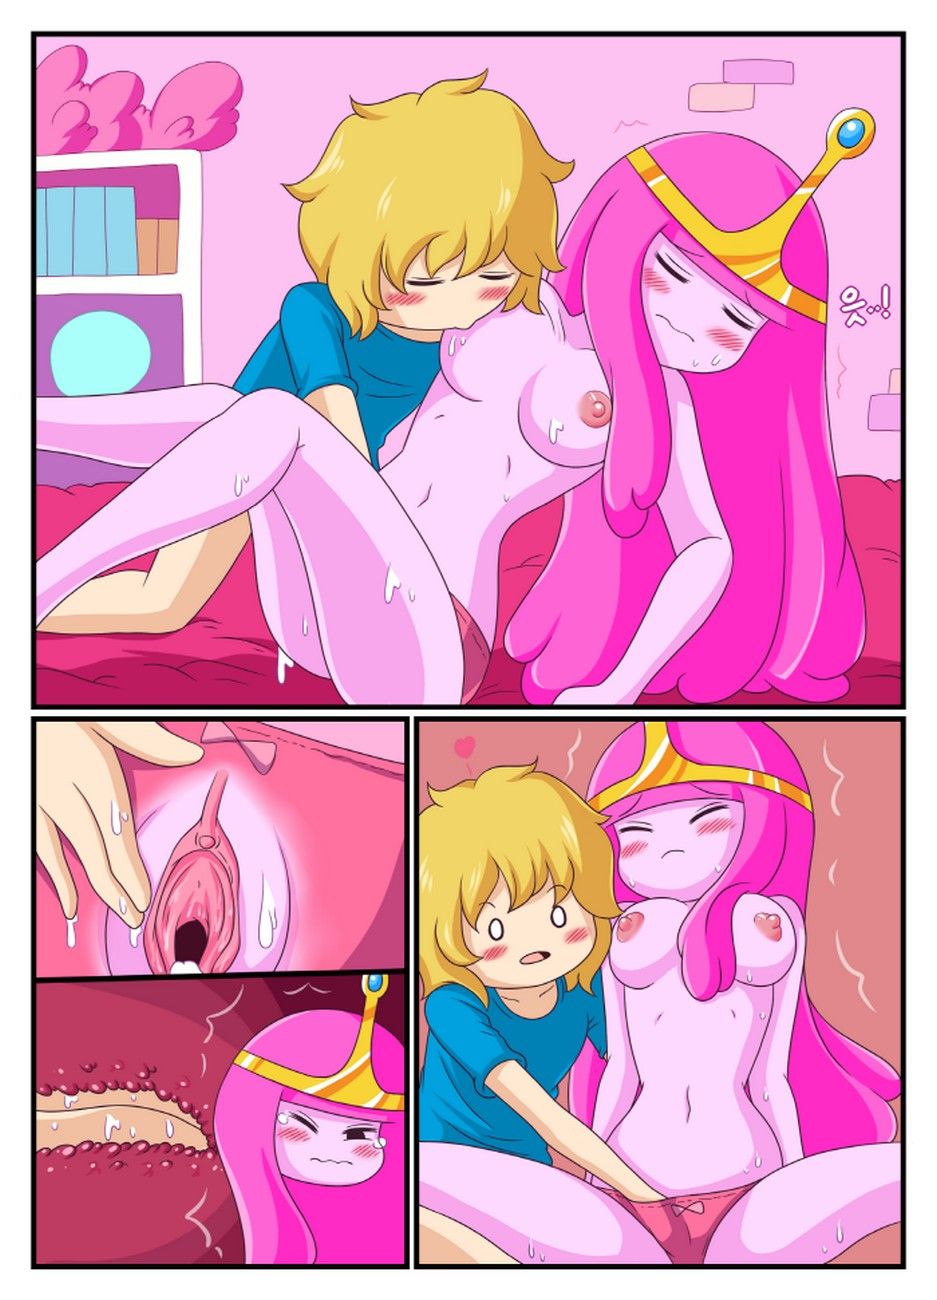 Adventure_Time_-_Adult_Time_1 comix_43457.jpg